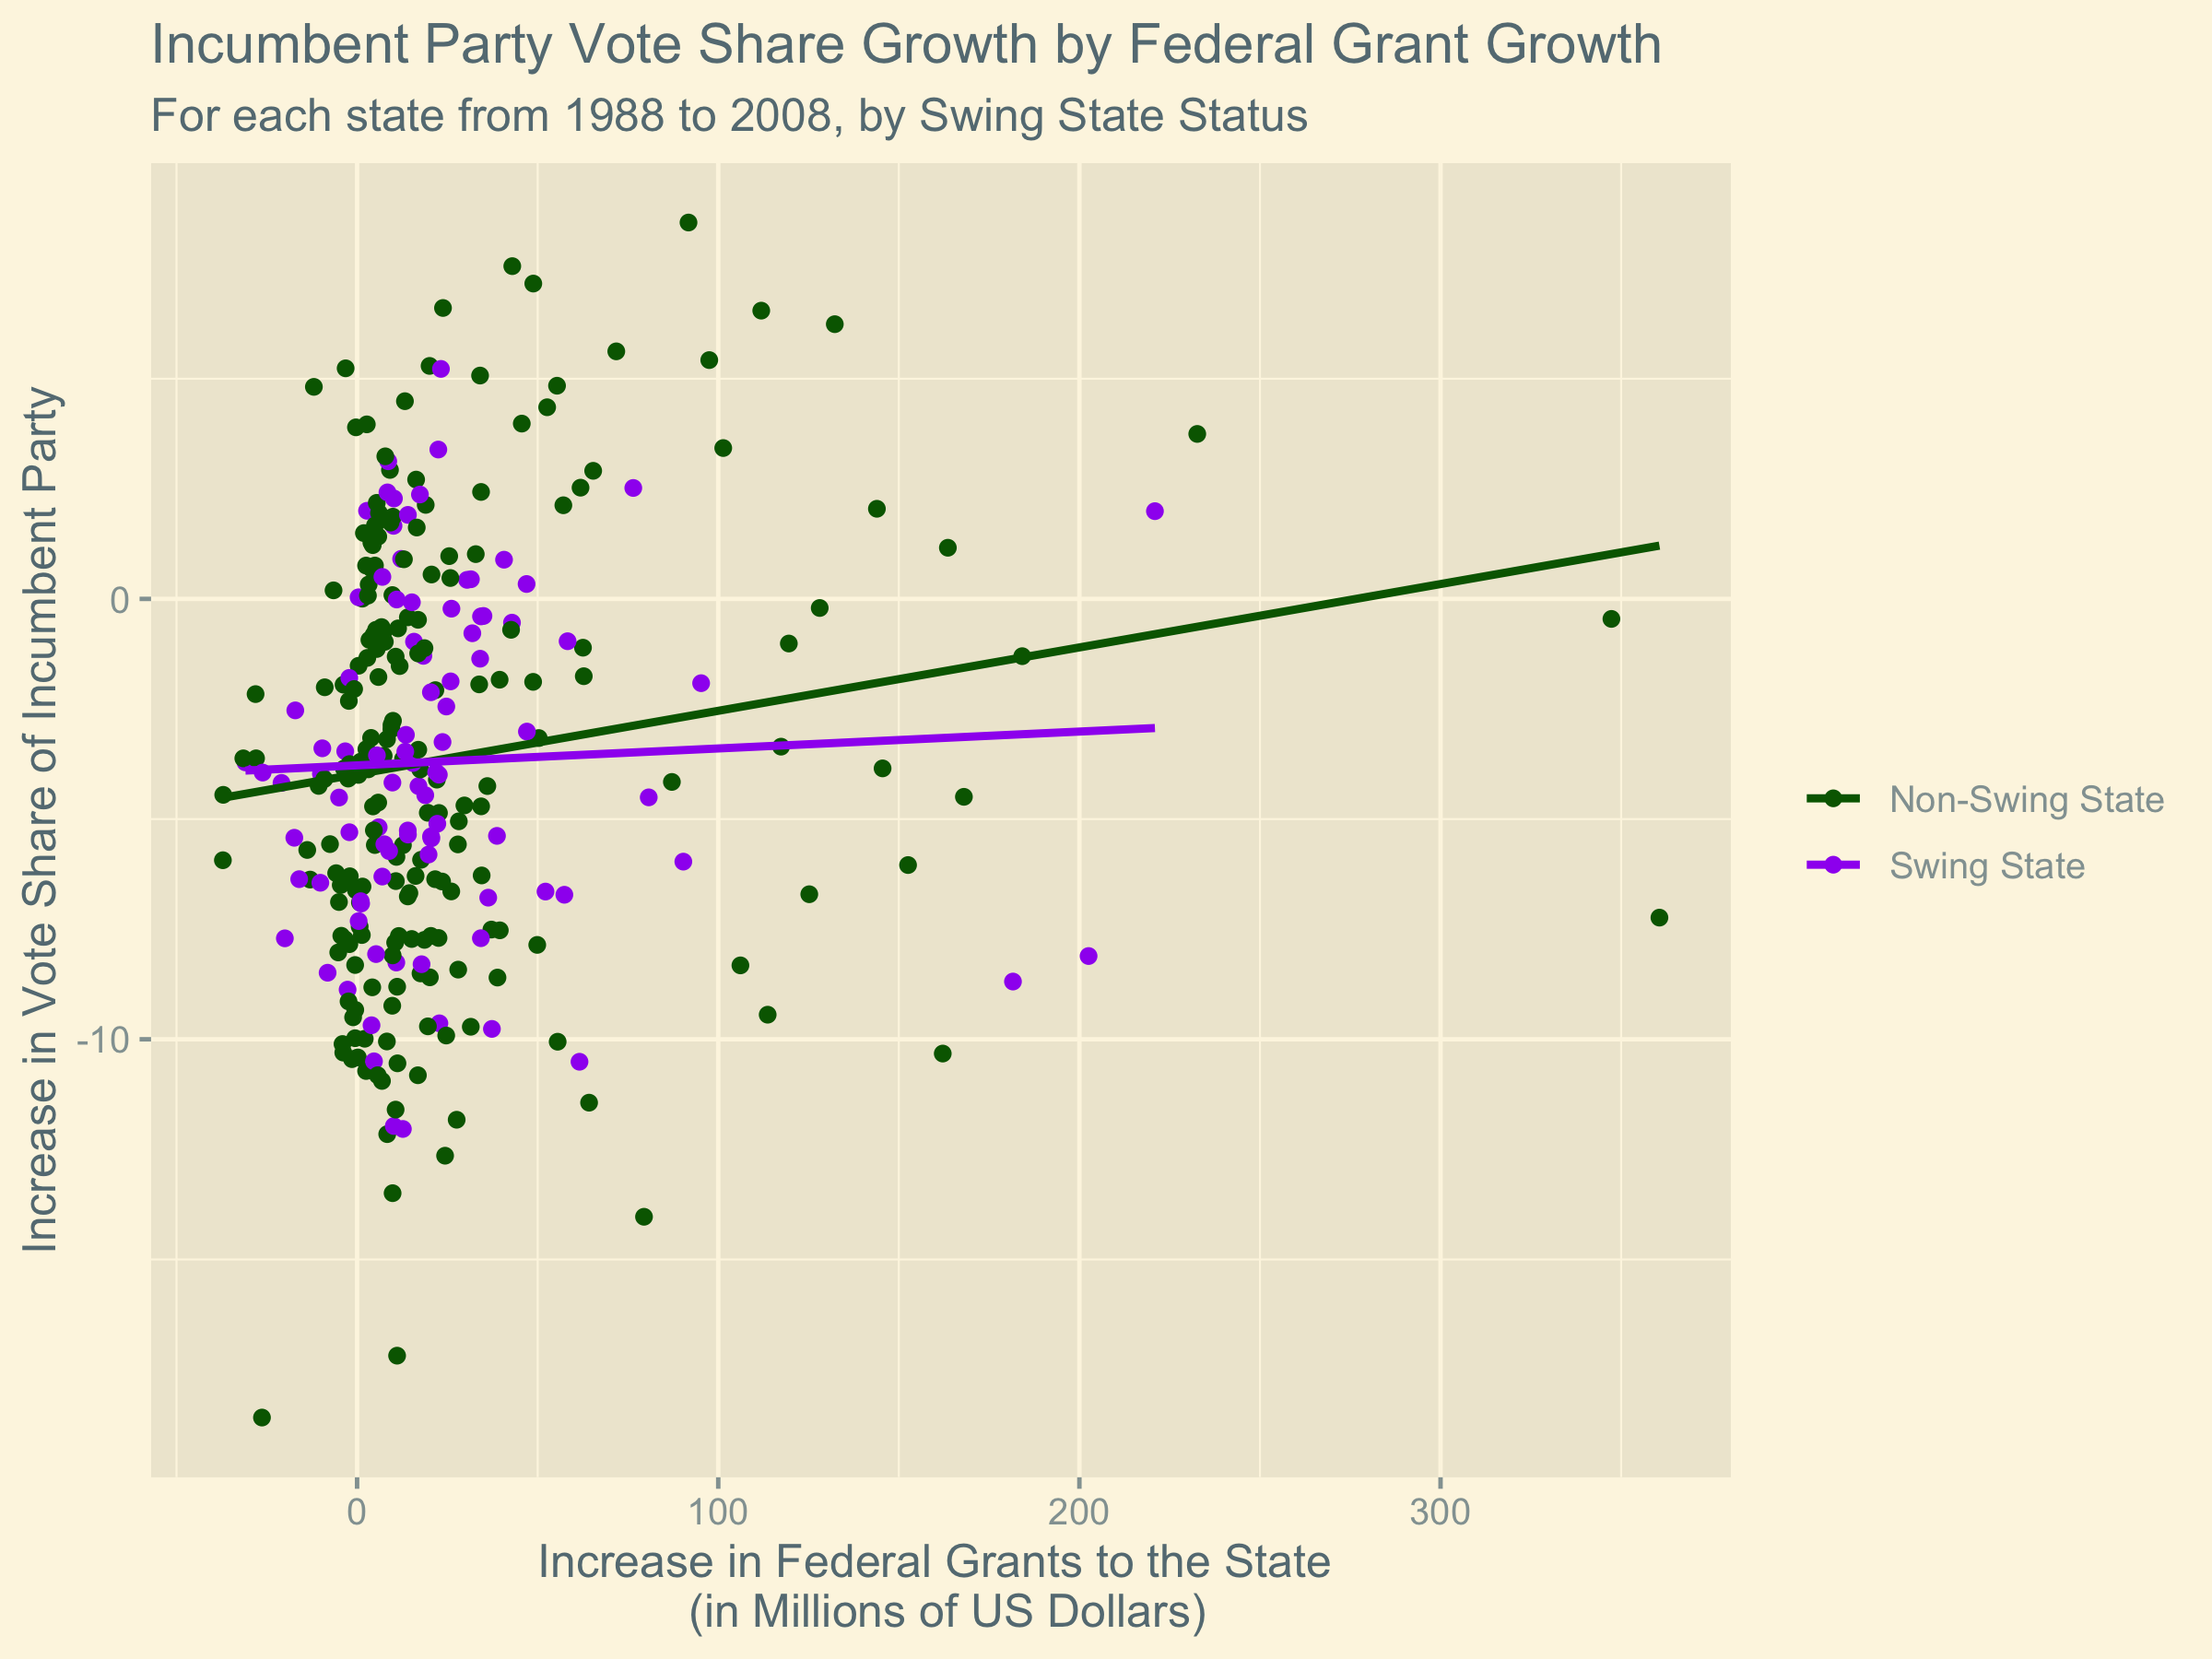 image of grants vs votes by swing state status